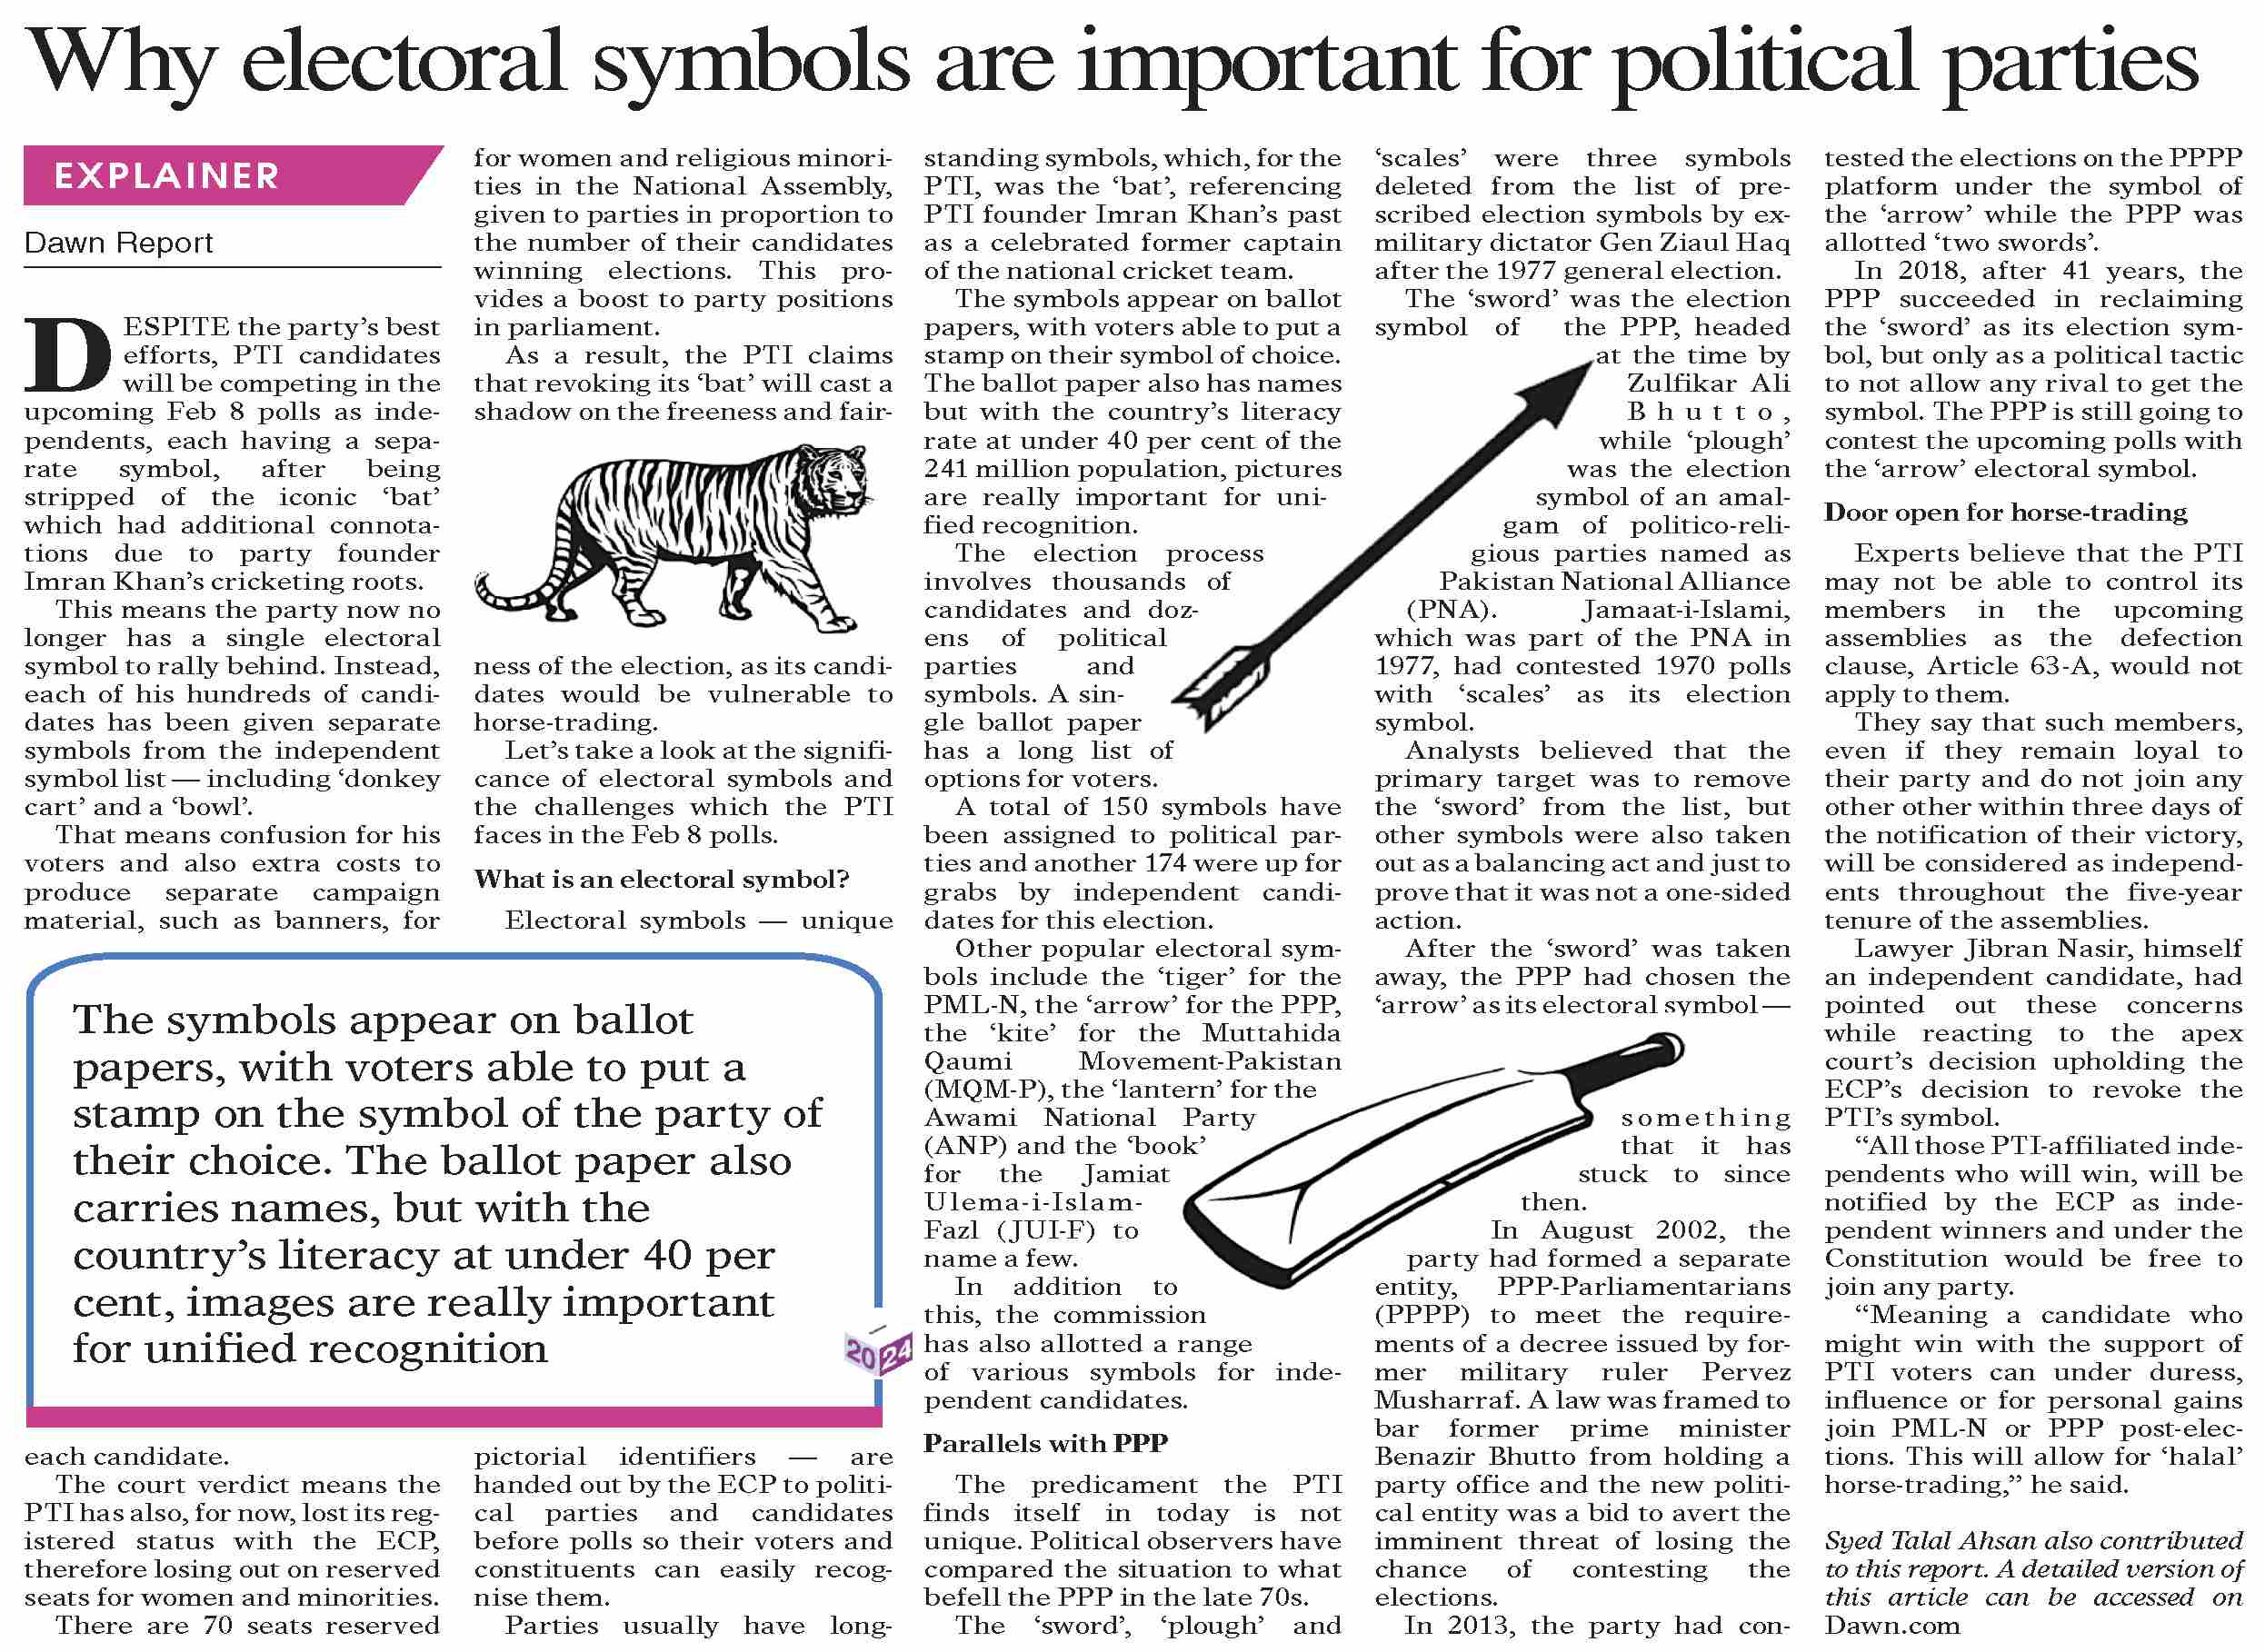 Why electoral symbols are important for political parties in Pakistan